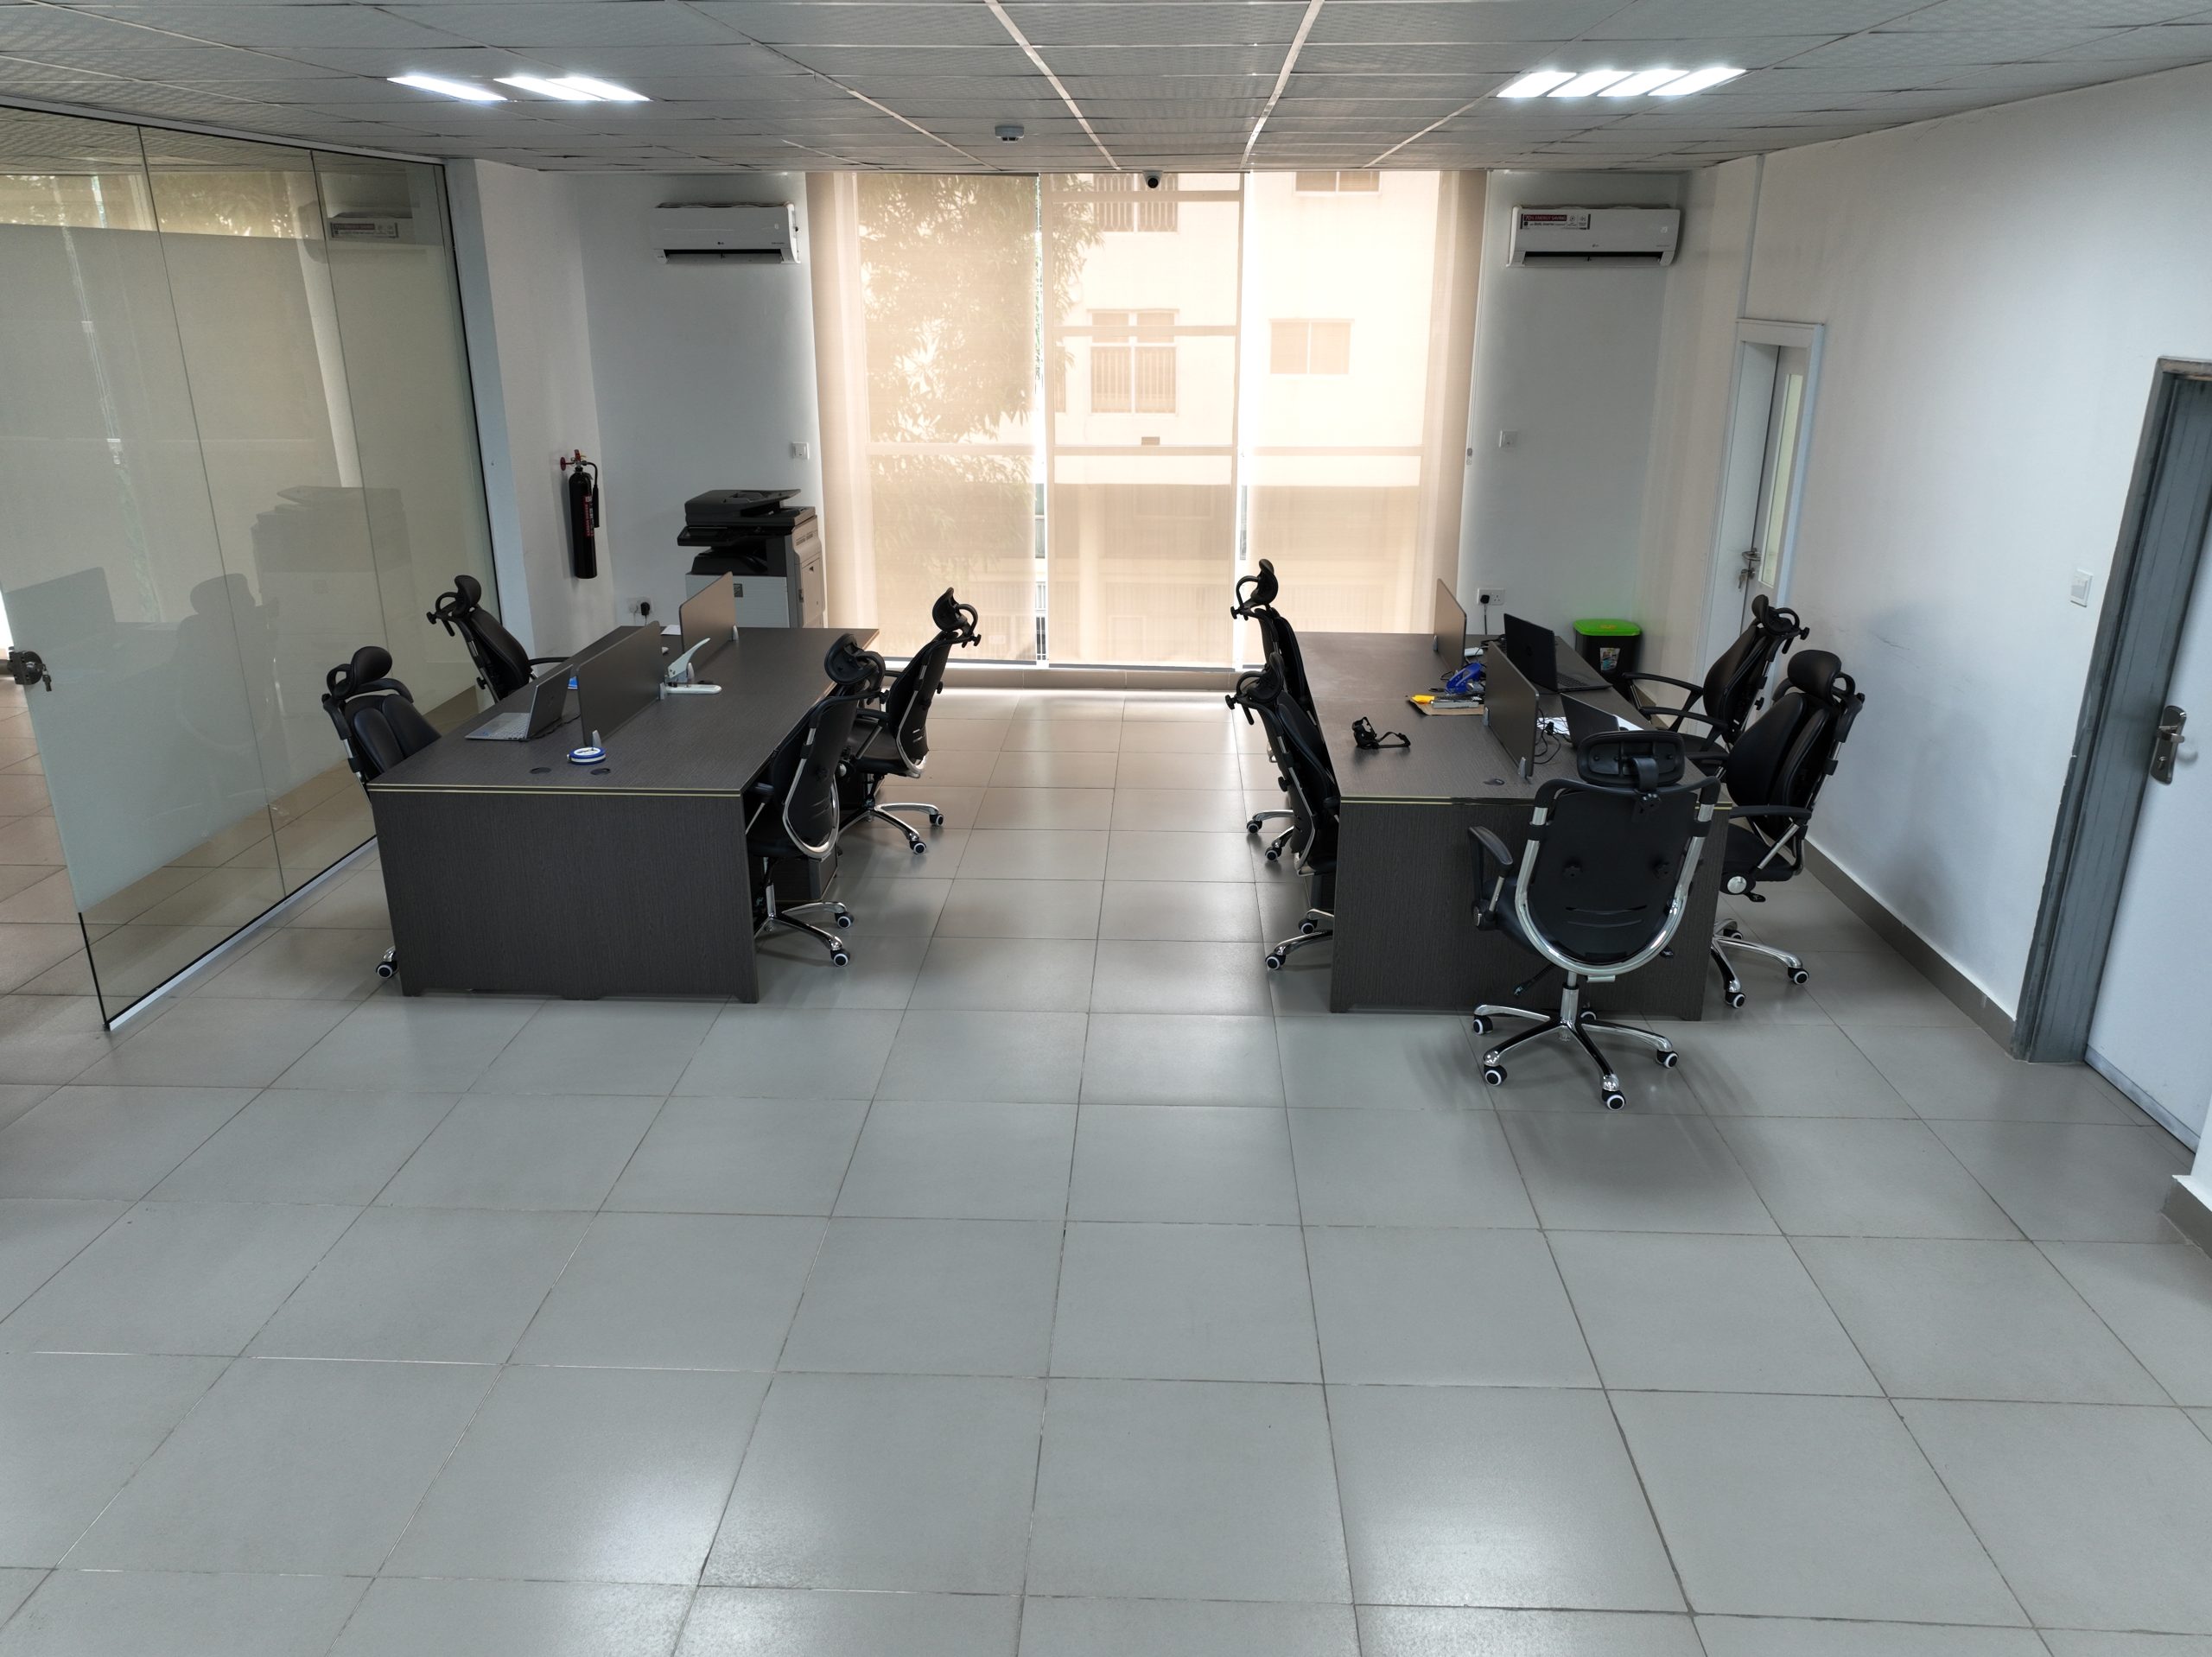 Alphabait-Office-space-8-scaled.jpg